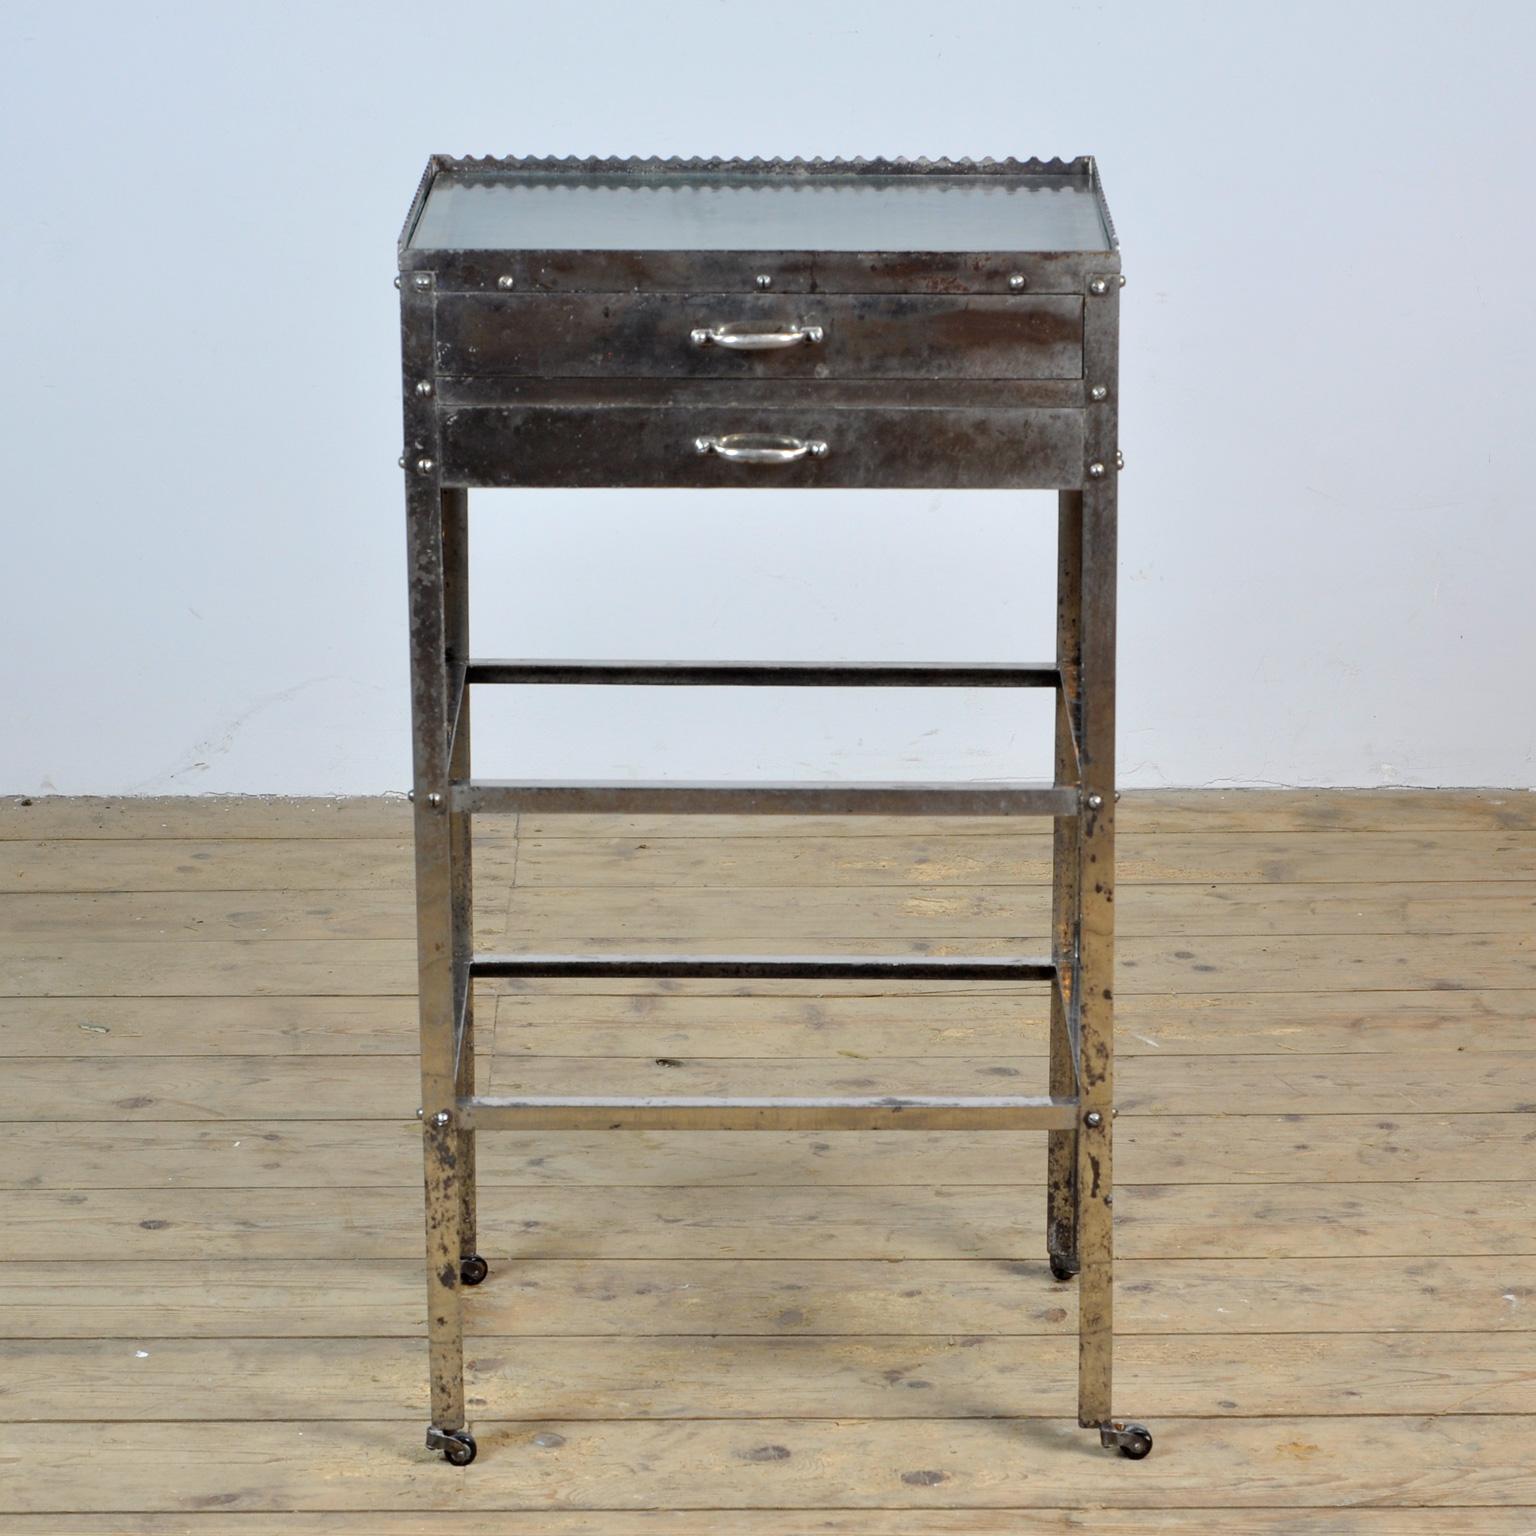 Hospital trolley from circa 1920. The trolley is made of chrome-plated iron with a glass top and glass in the two drawers. The wrinkled glass is from the same period.